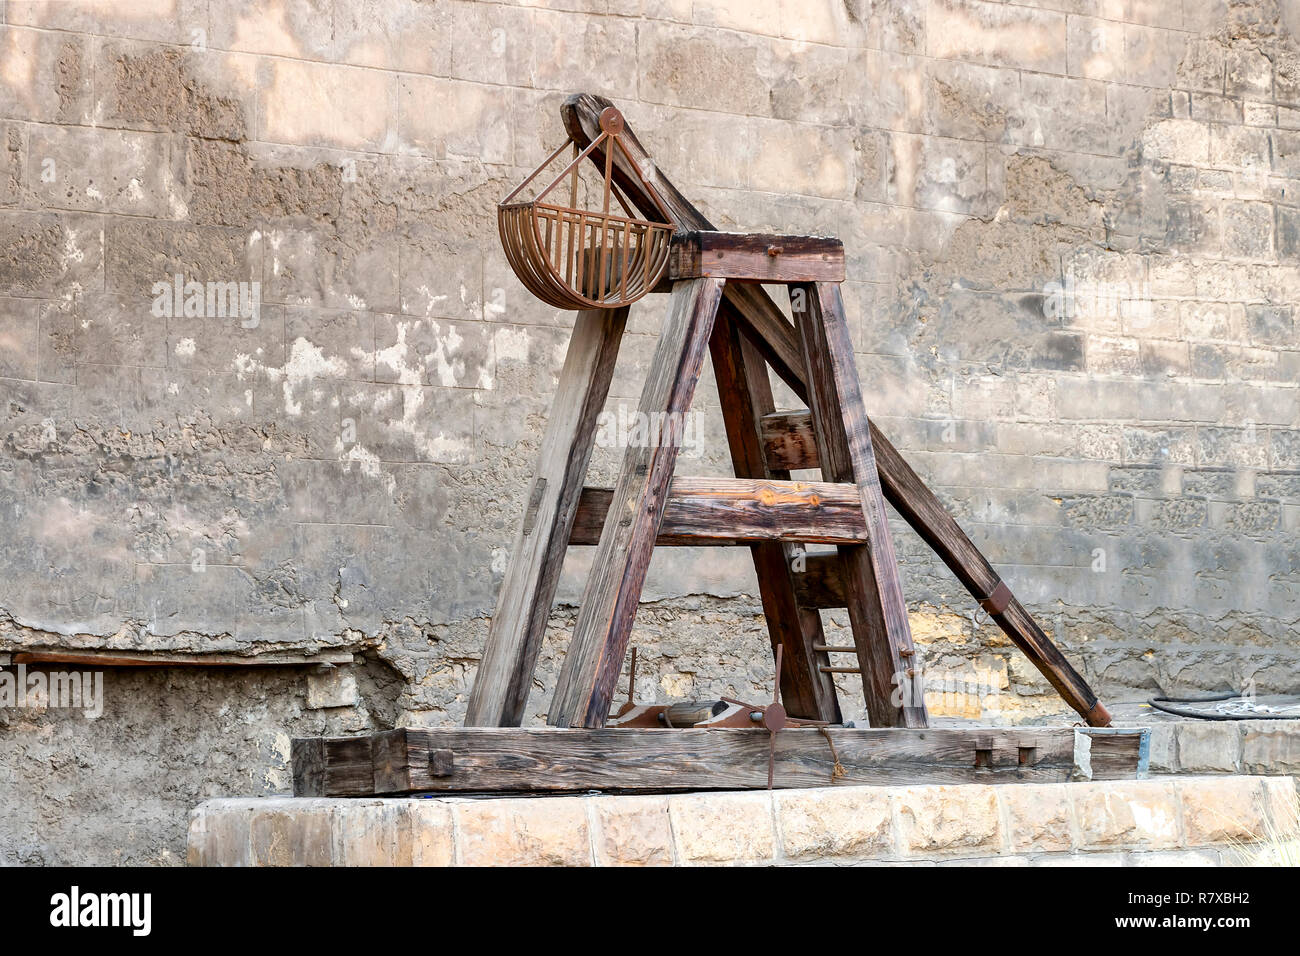 Wooden Medieval Catapult. Ballistic Device. Ancient Military Technology Stock Photo